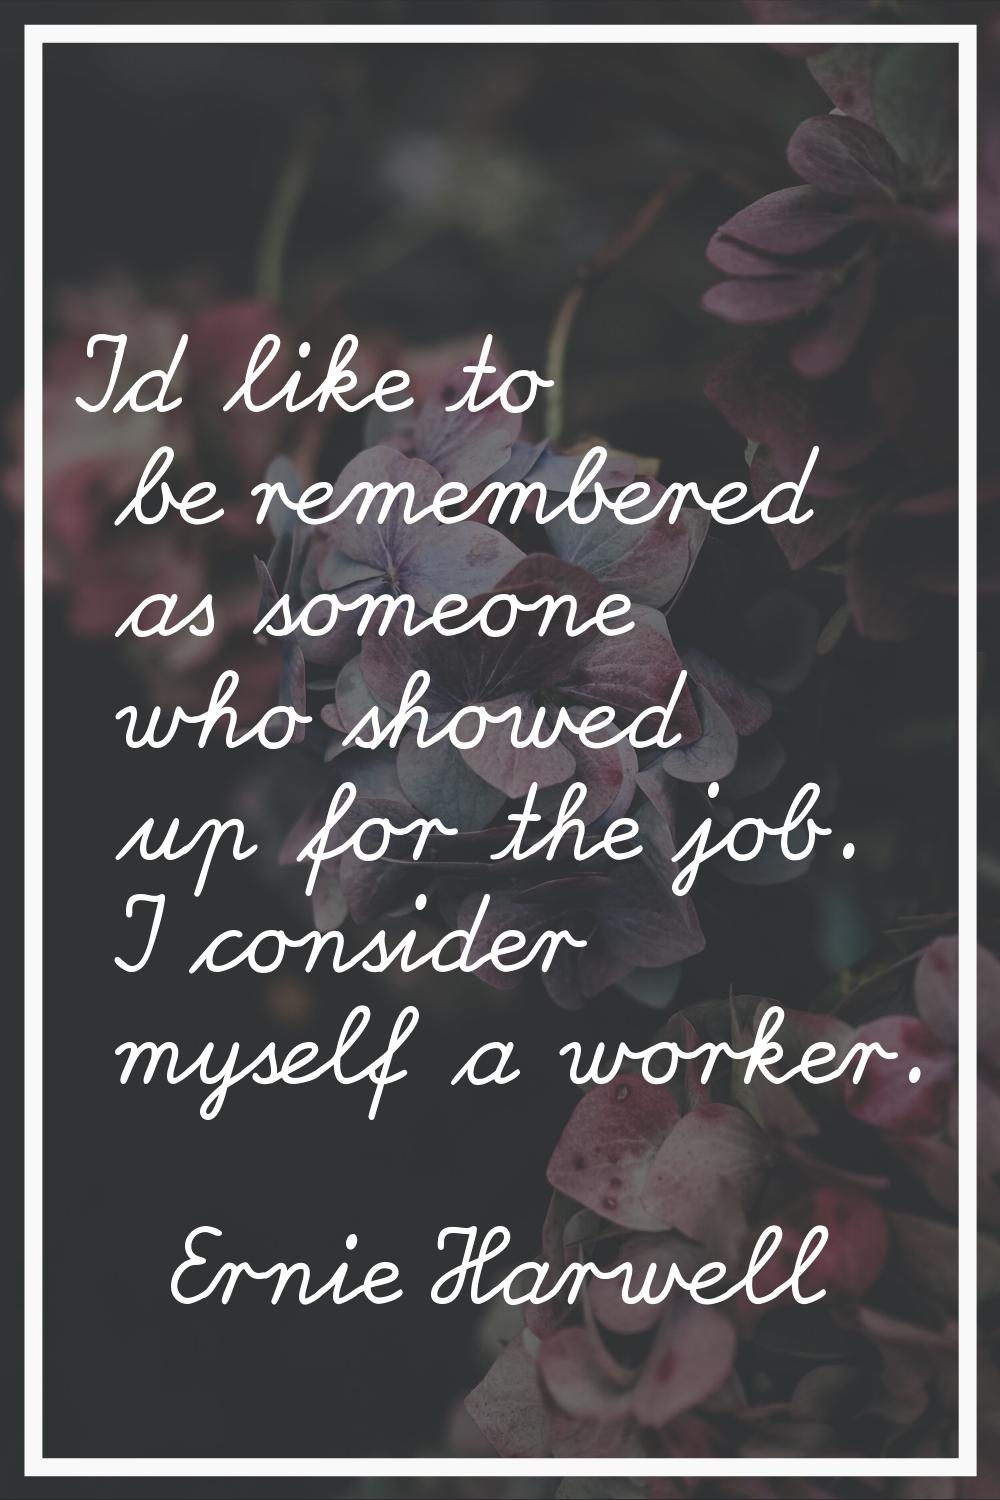 I'd like to be remembered as someone who showed up for the job. I consider myself a worker.